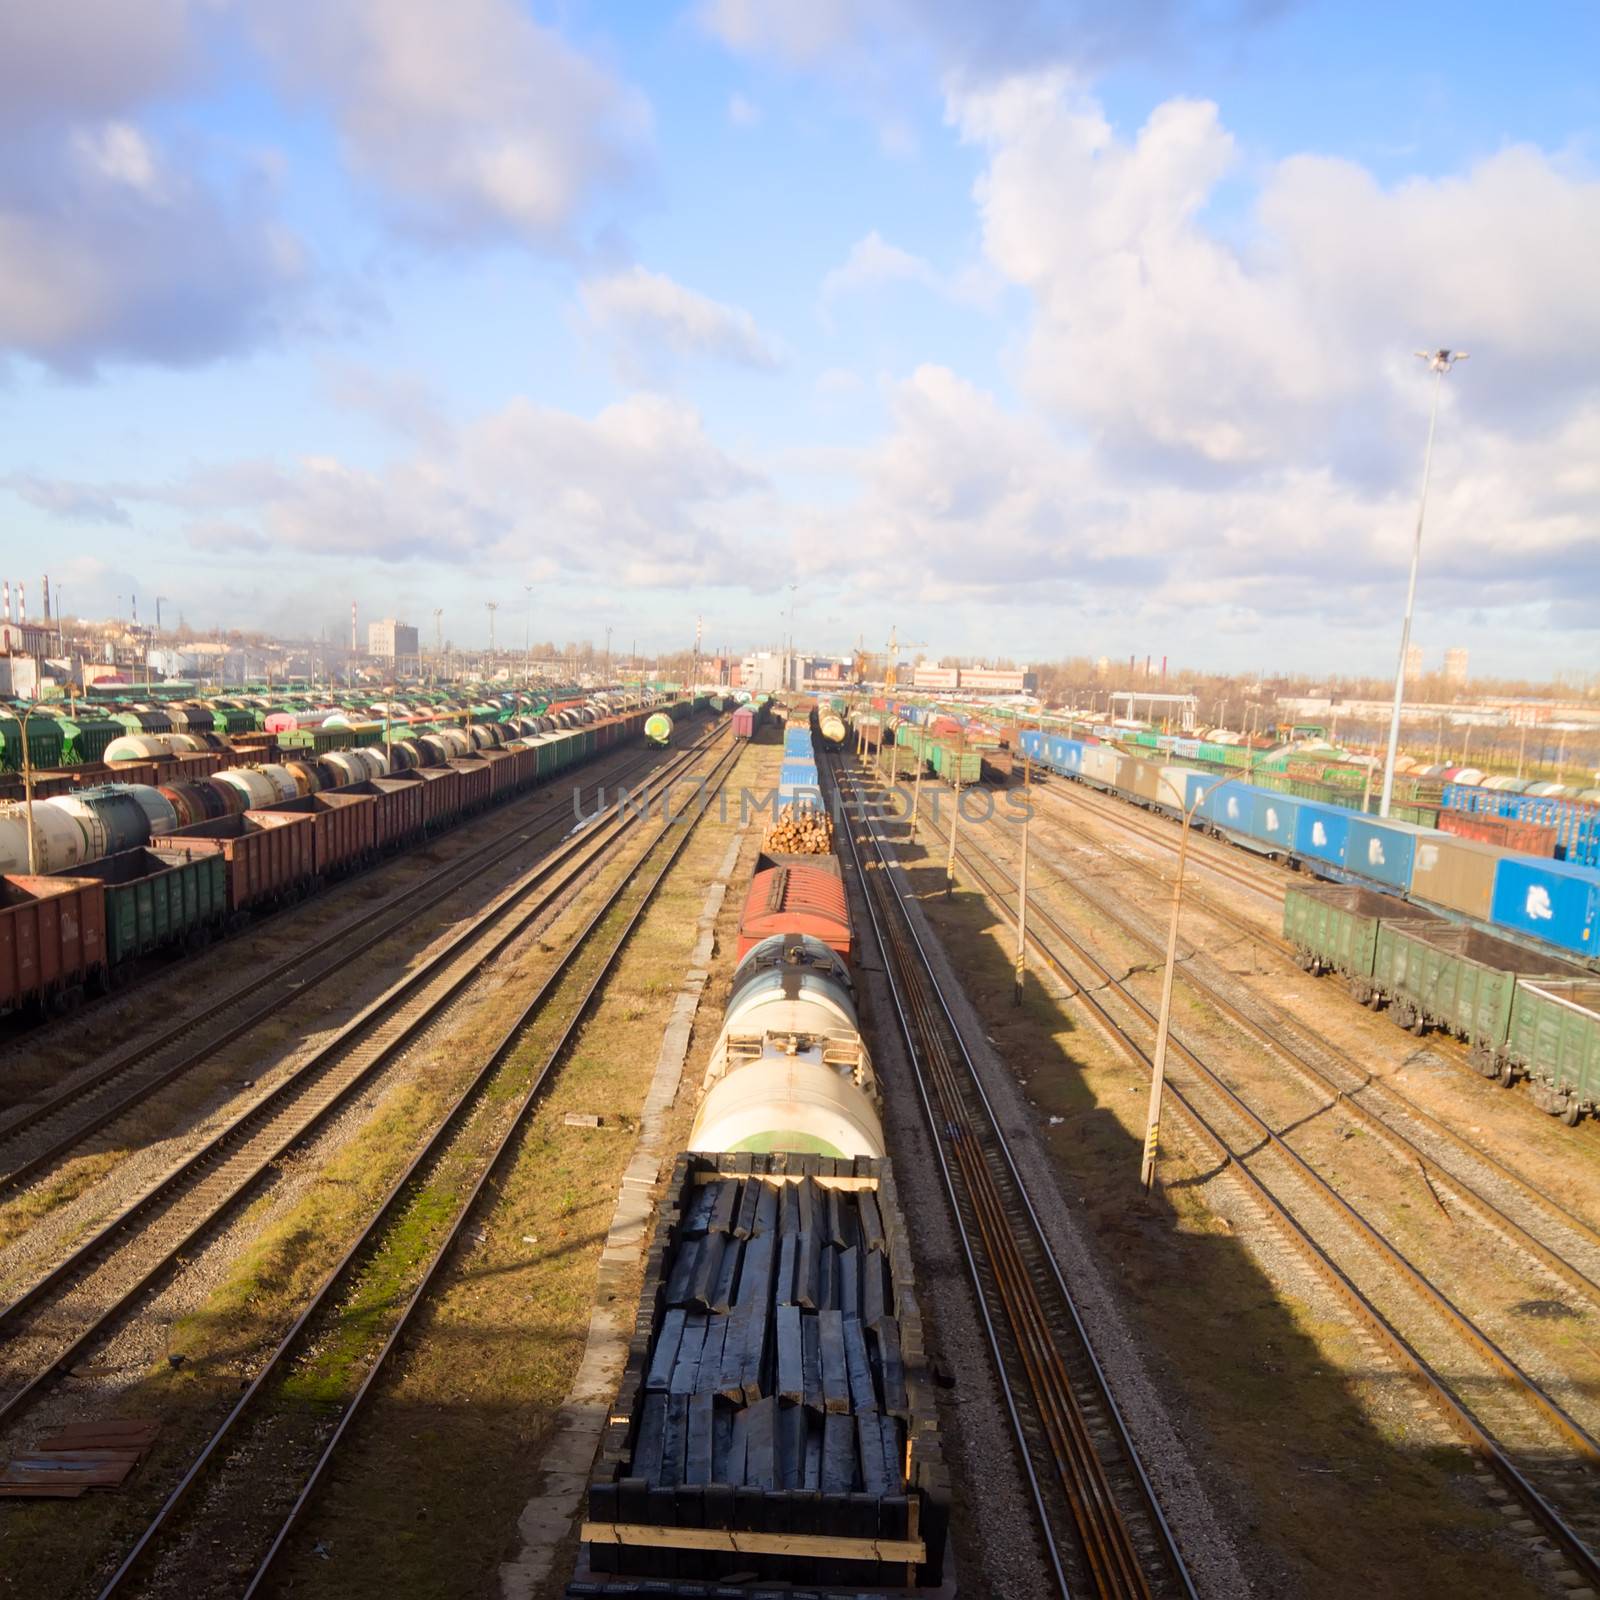 Freight train with color cargo containers in depot